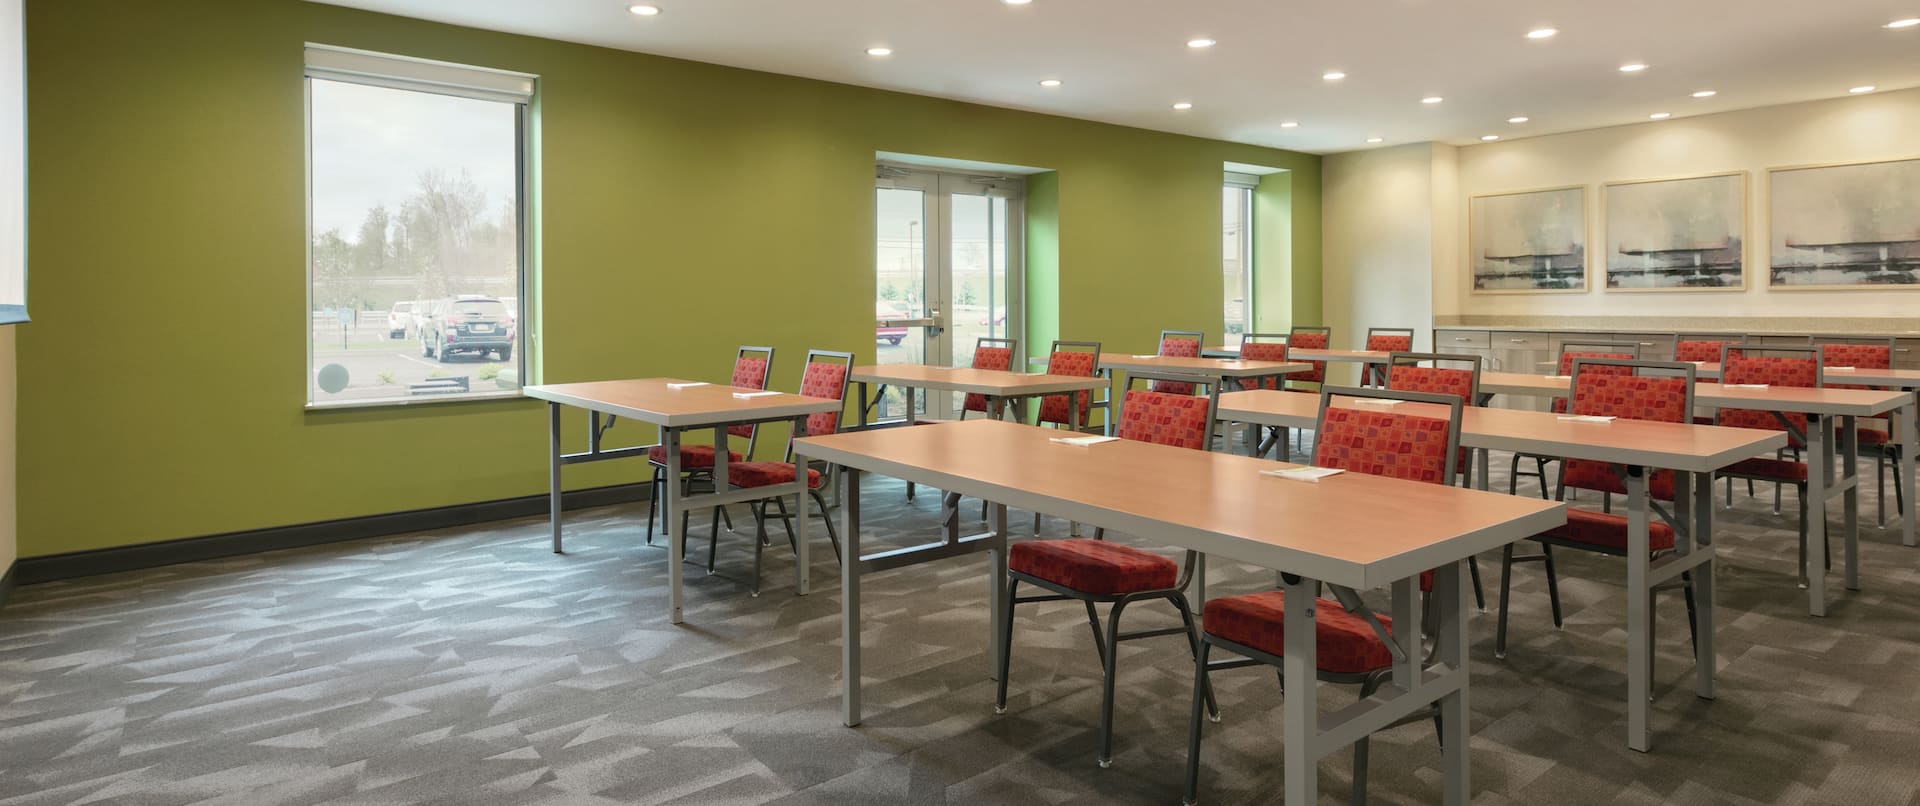 Freeman Meeting Room with tables and chairs